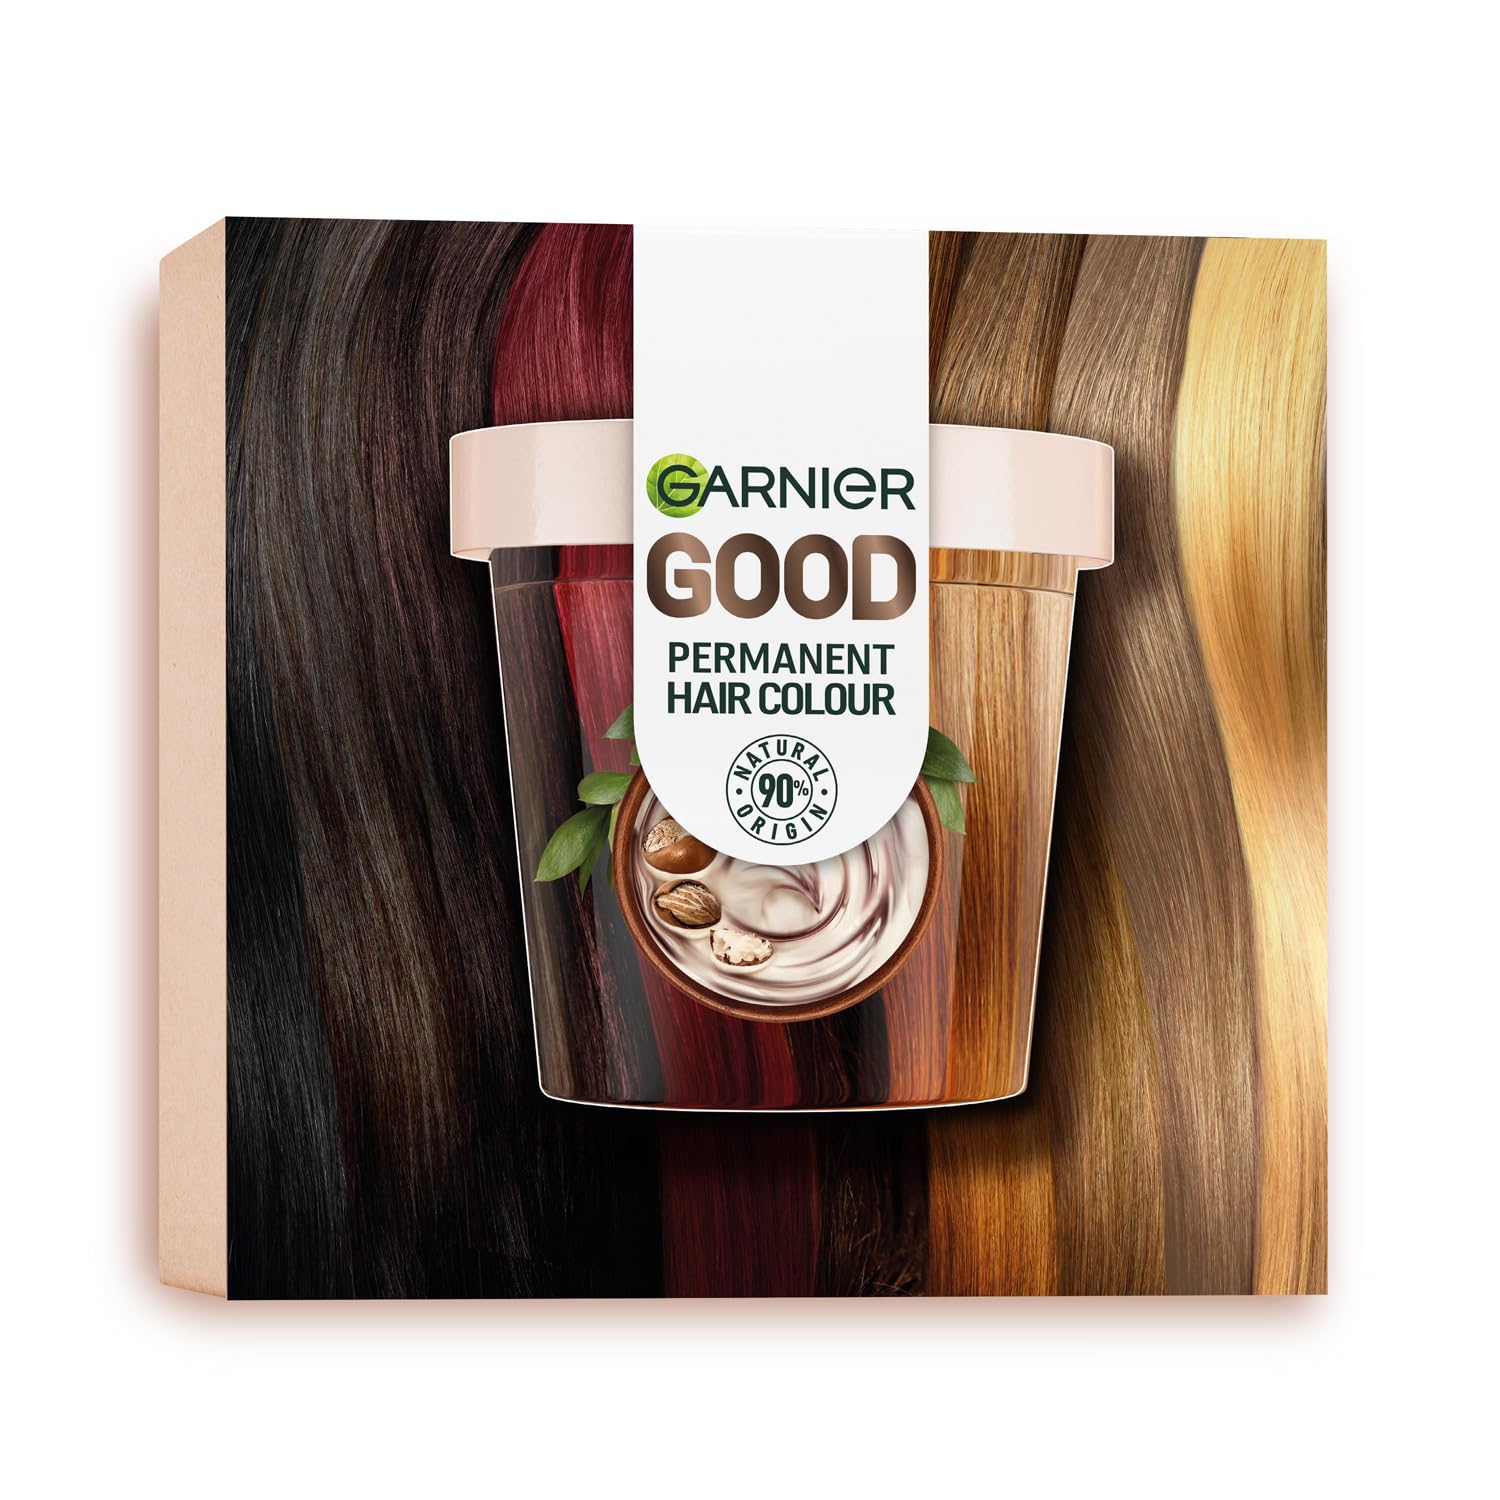 Garnier Good Starter Set Permanent Hair Color, Hair Dye Set for Intense and Long-Lasting, Colouration for Up to 8 Weeks of Radiant Color, No Ammonia, 6.0 Moccino Brown